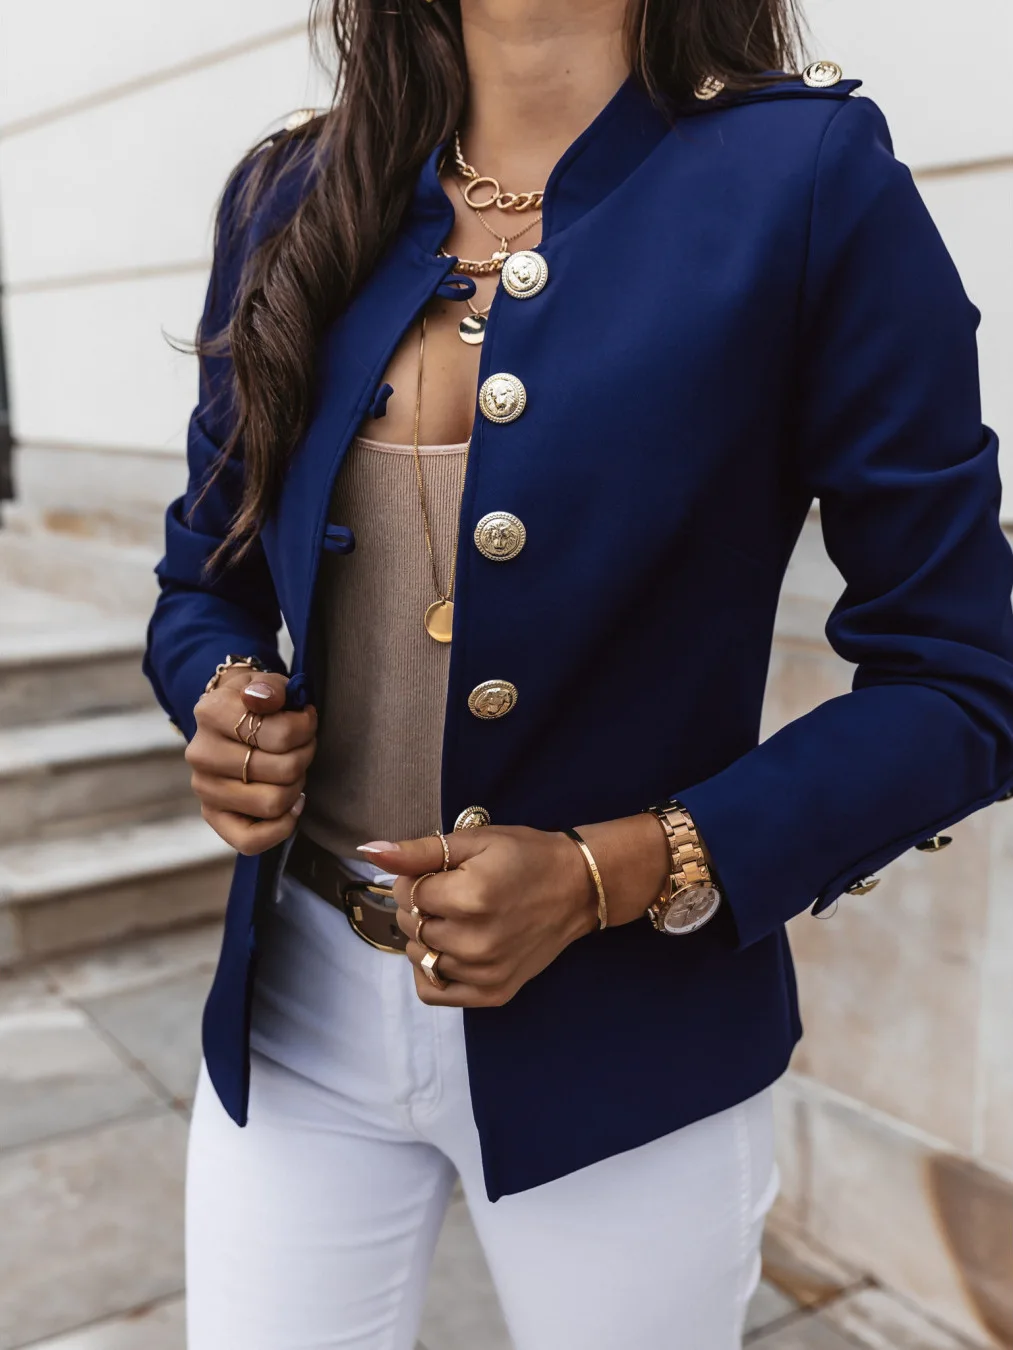 2021 New Fashion Stand Collar Blazers Women Solid Colors Single Breasted Office Jacket Long Sleeve Multi Button Slim Work Blazer